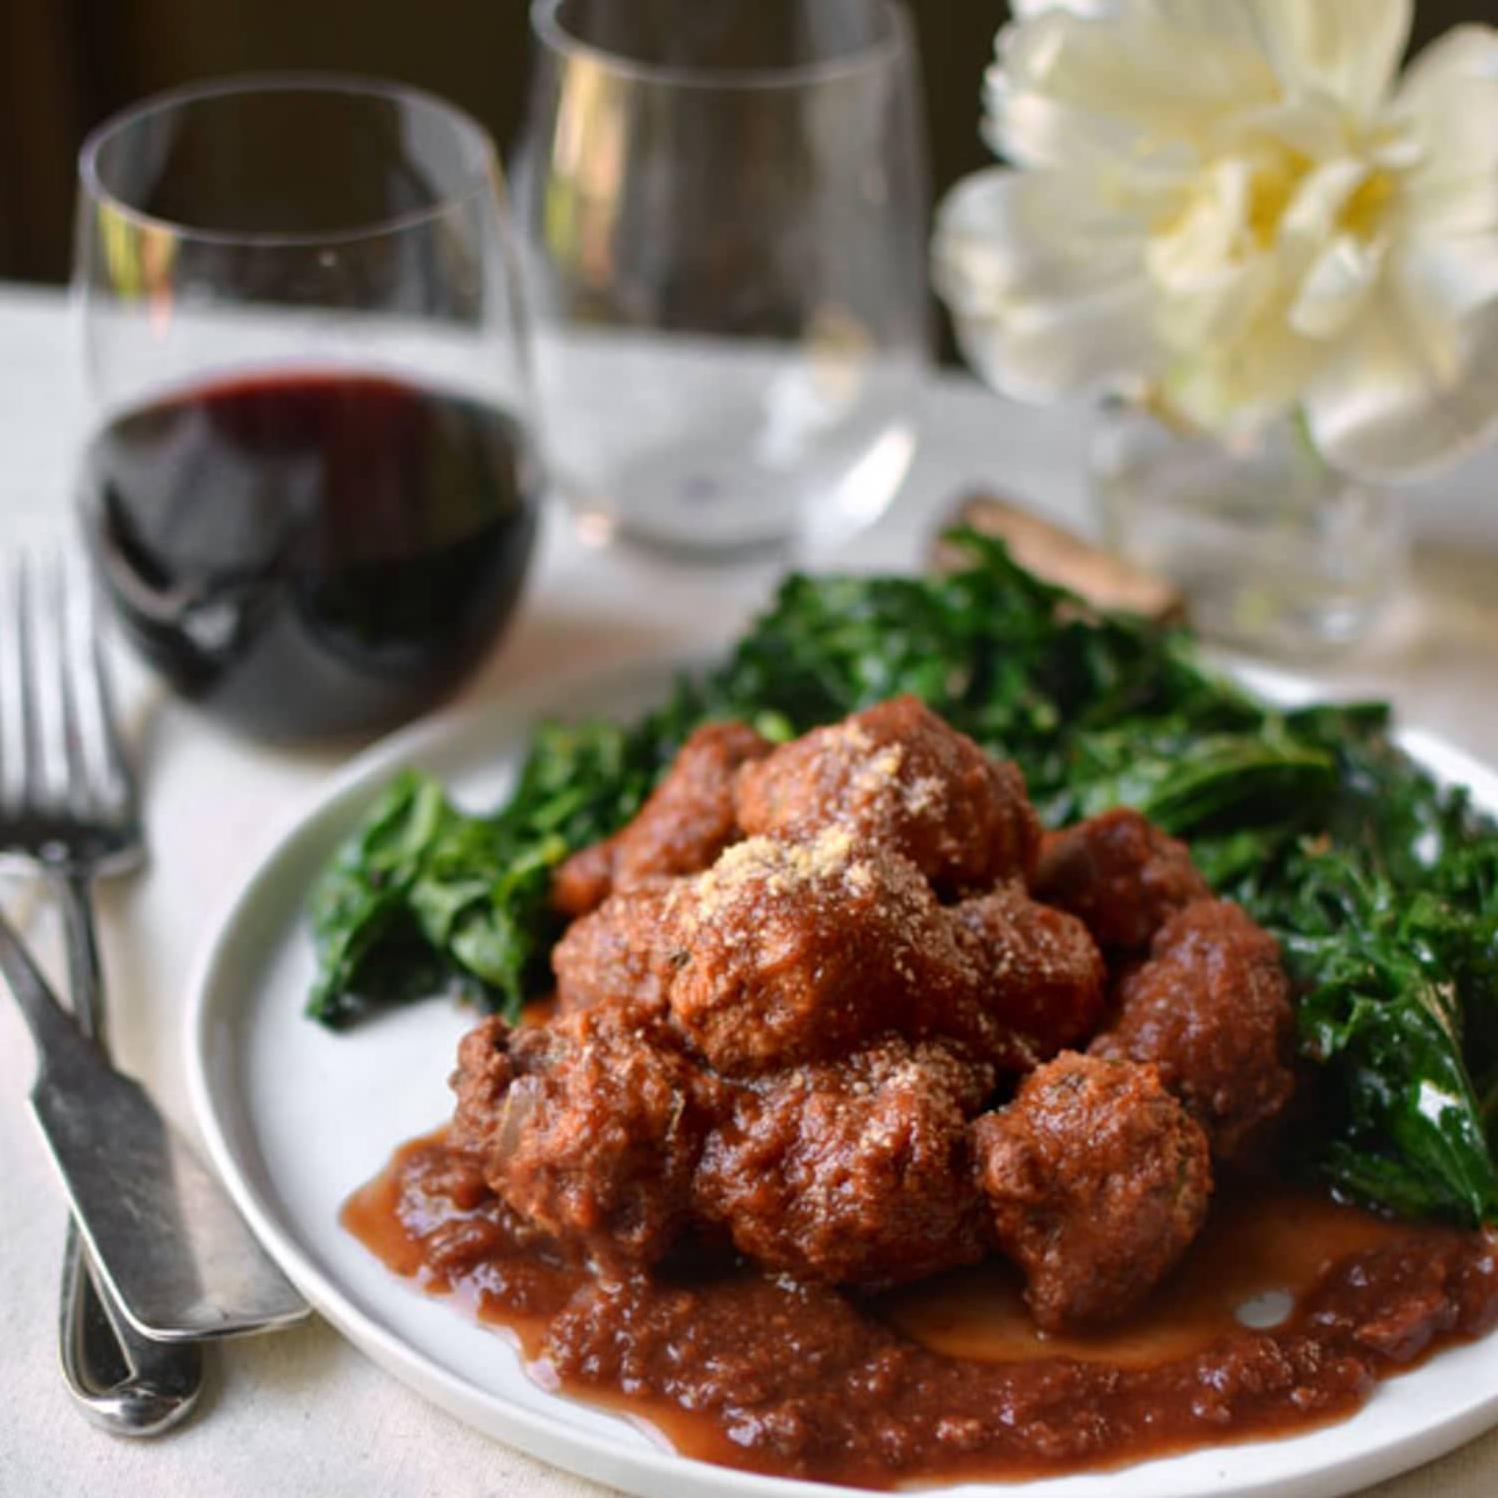  With a glass of your favorite red wine, this meal is an ultimate comfort food.